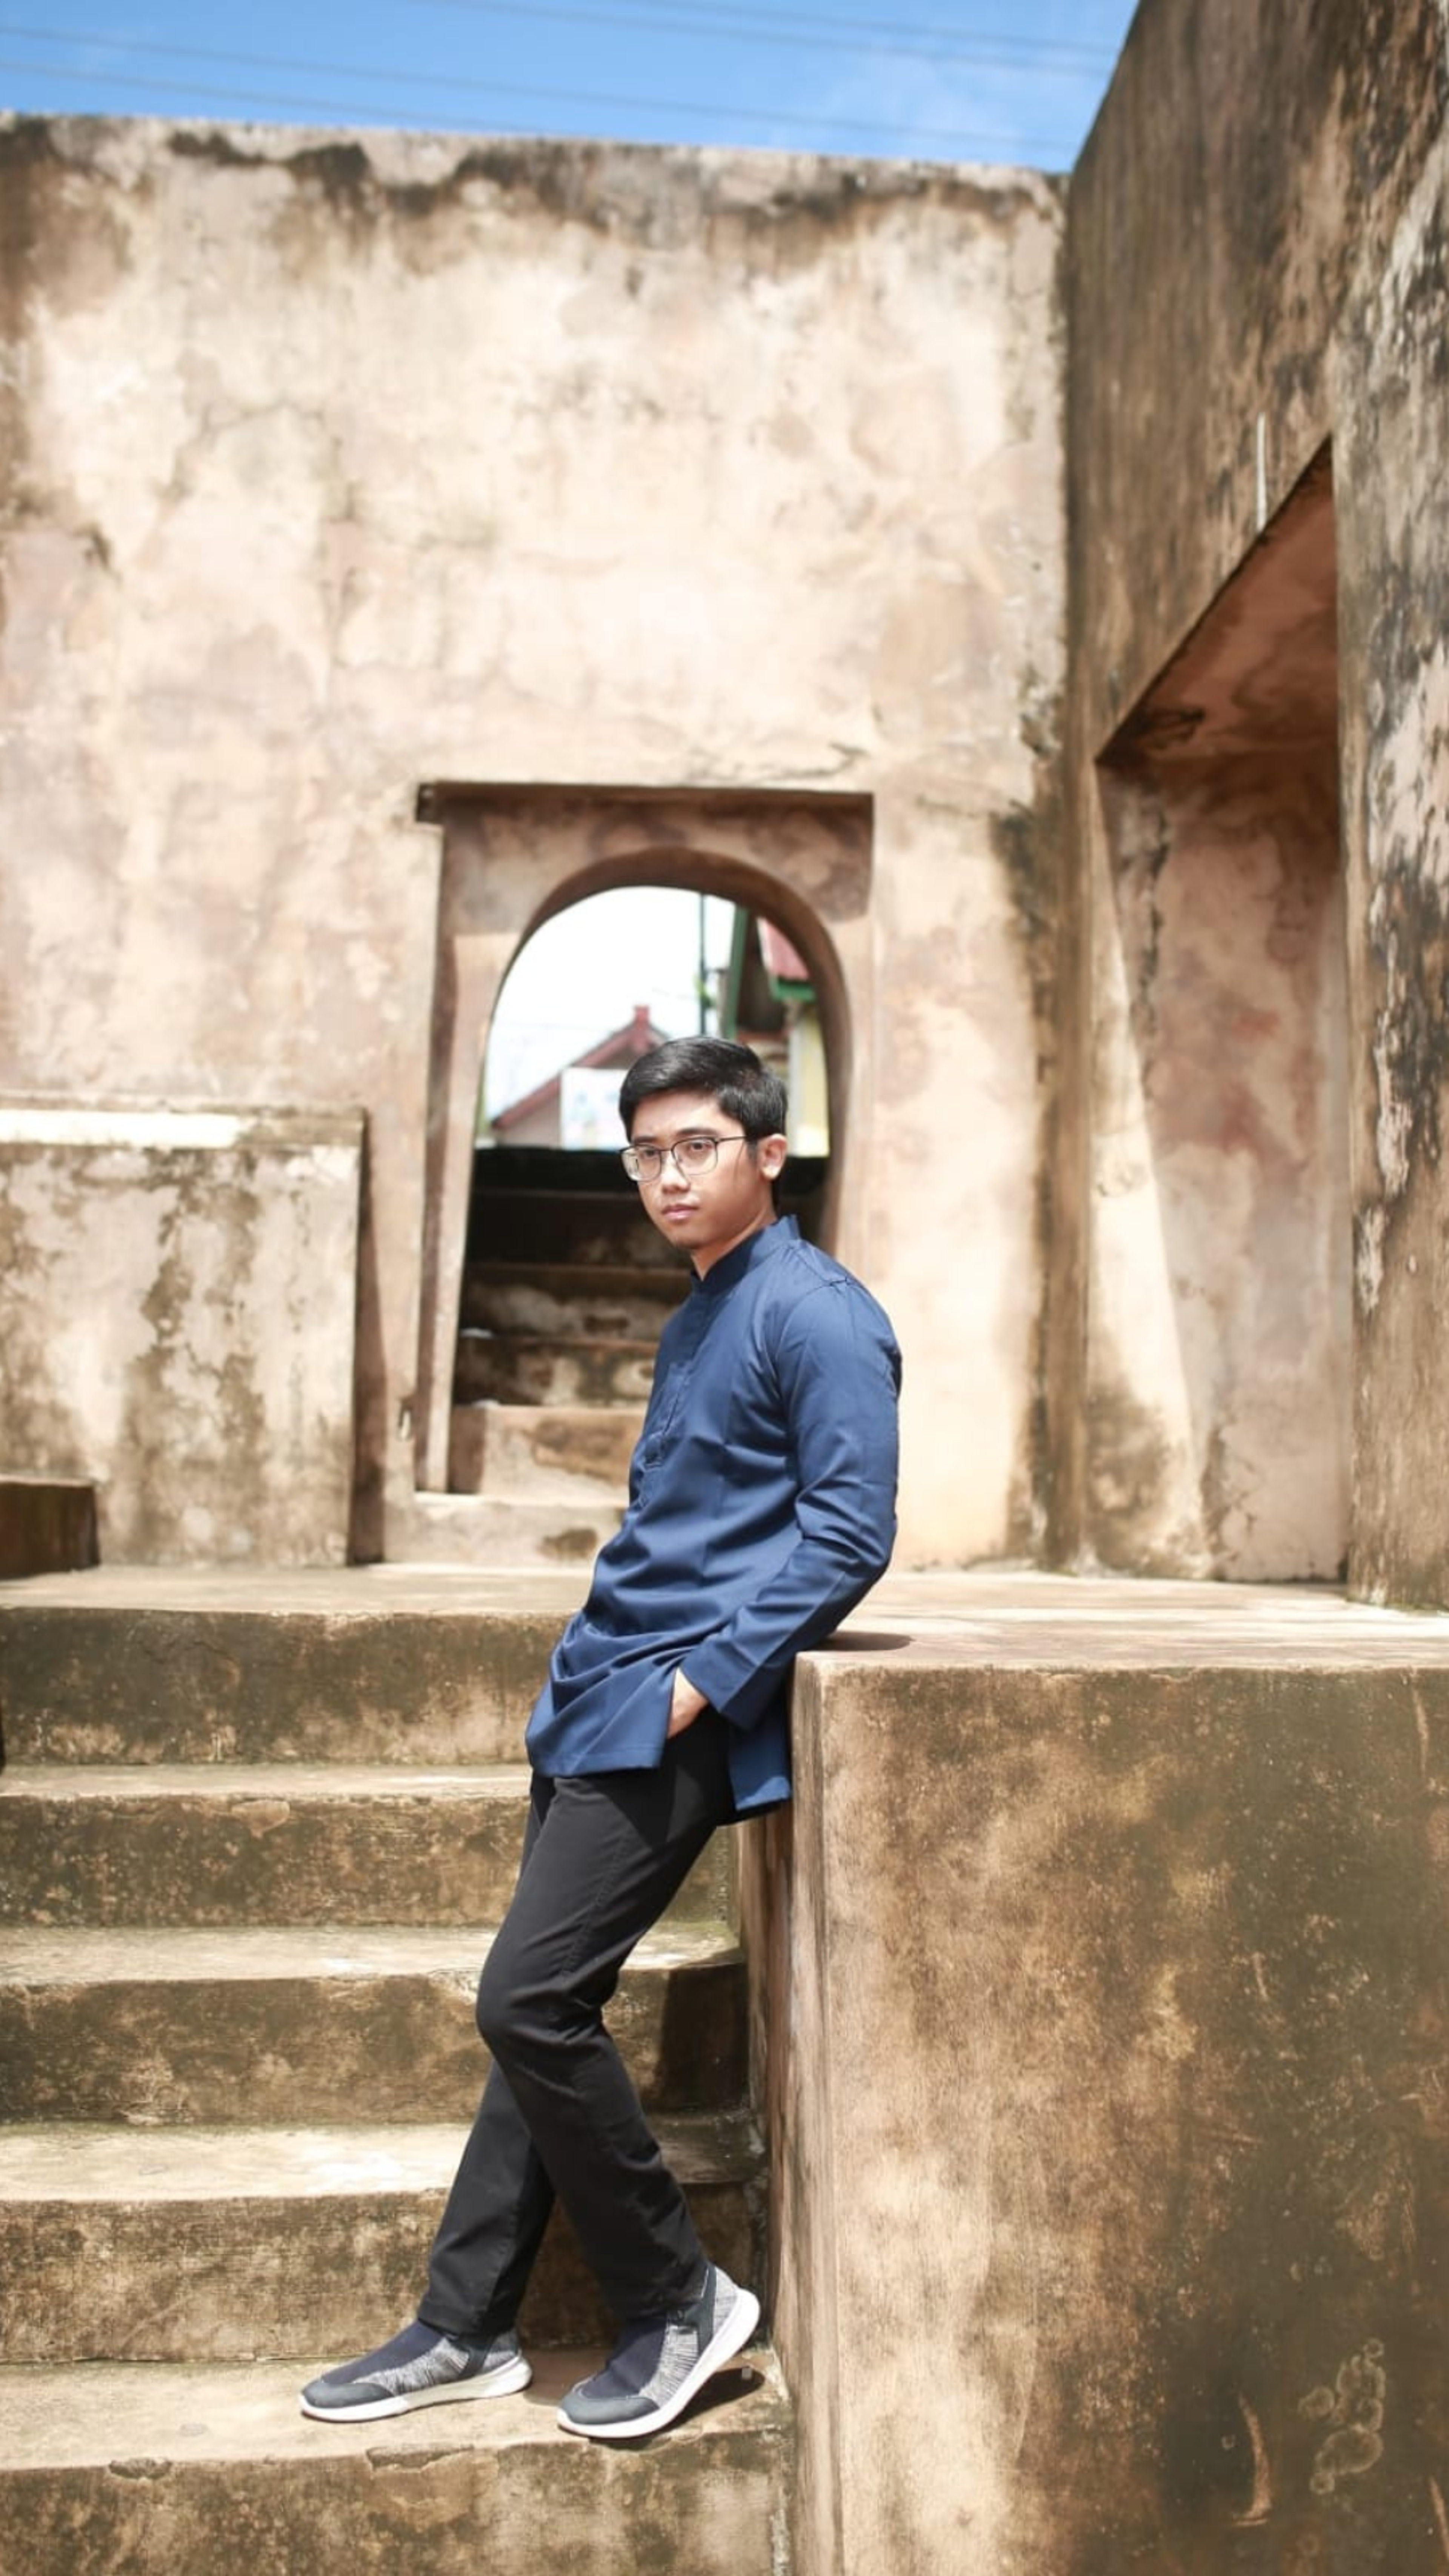 A thoughtful young man in a navy shirt and black pants leans against weathered stone steps of an old building.